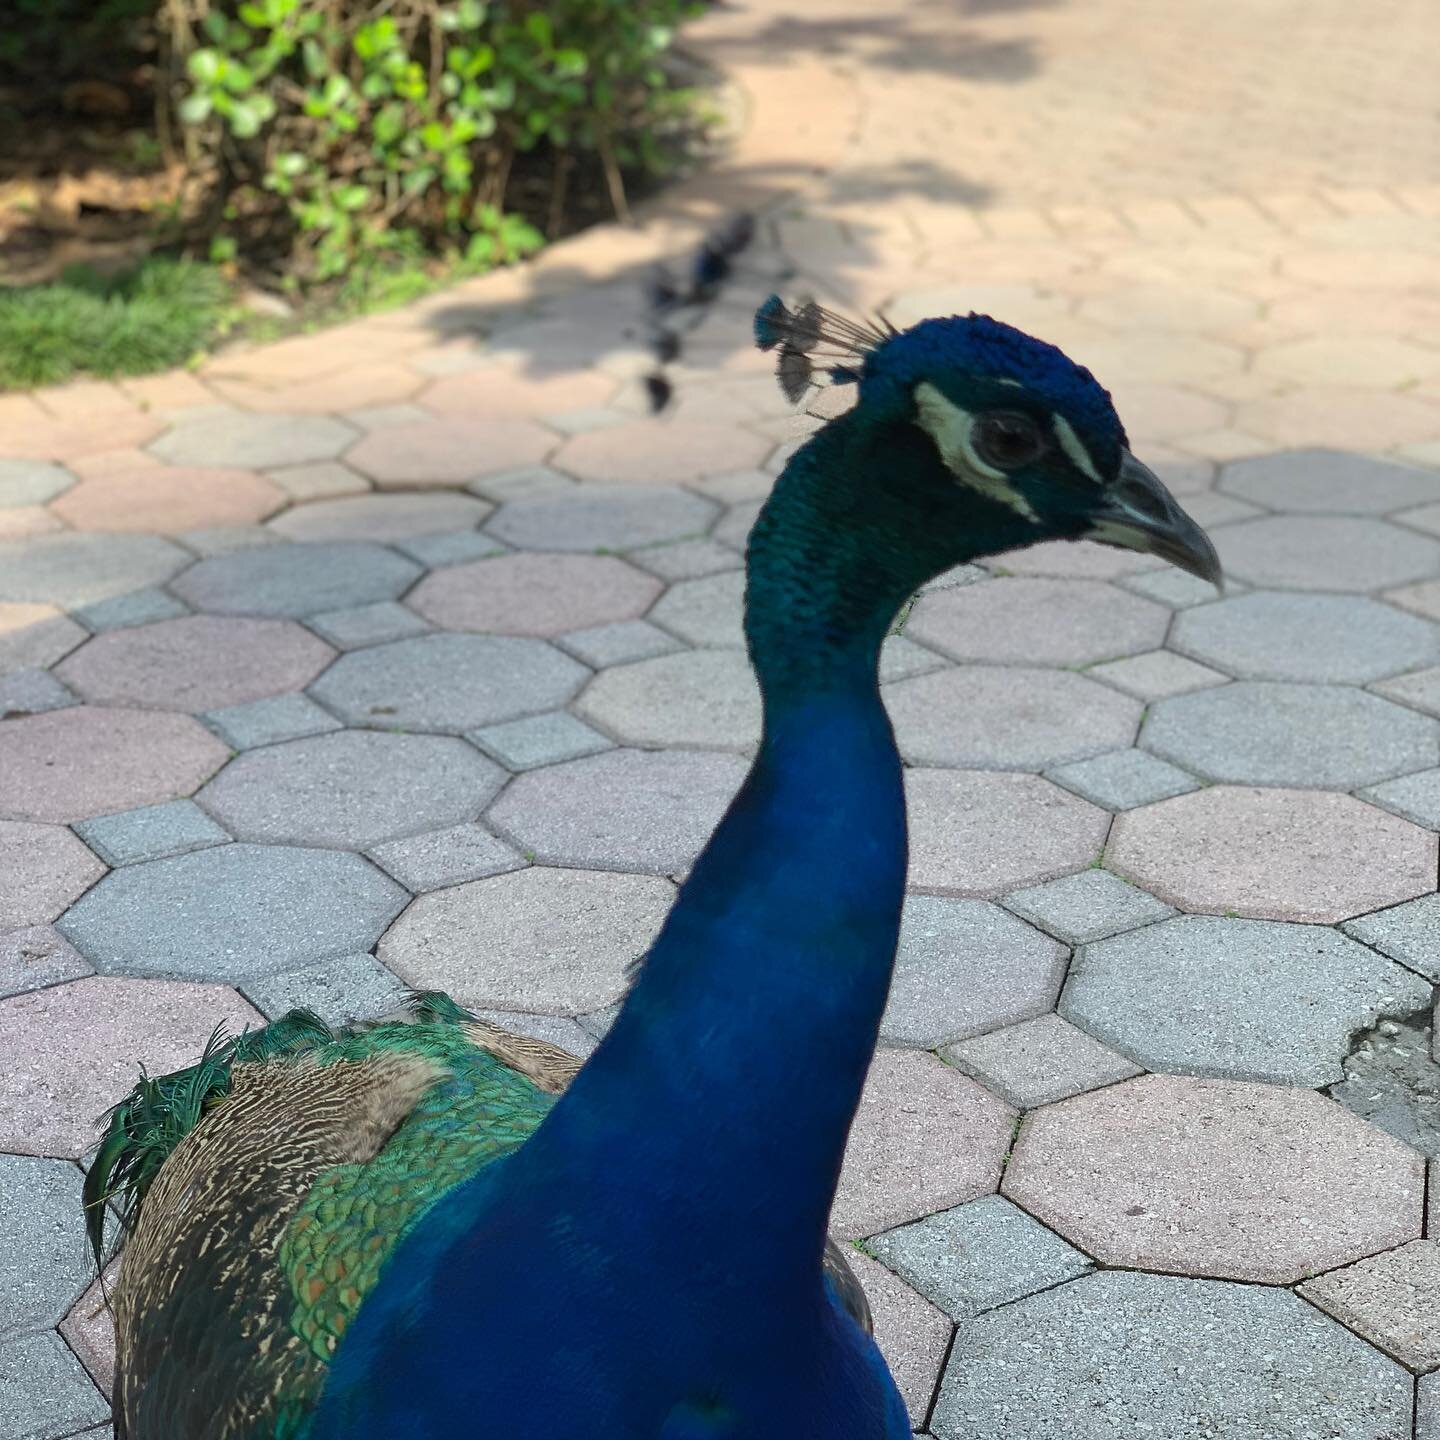 &ldquo;Any room on the team in the next book?&rdquo; I might have to write in this peacock!  Thank you @flamingogardens  #tessieandlolasavethedogs #booksofinstagram #middlegradebookstagram #booksformiddleschoolers #booksofinstagram #doglovers